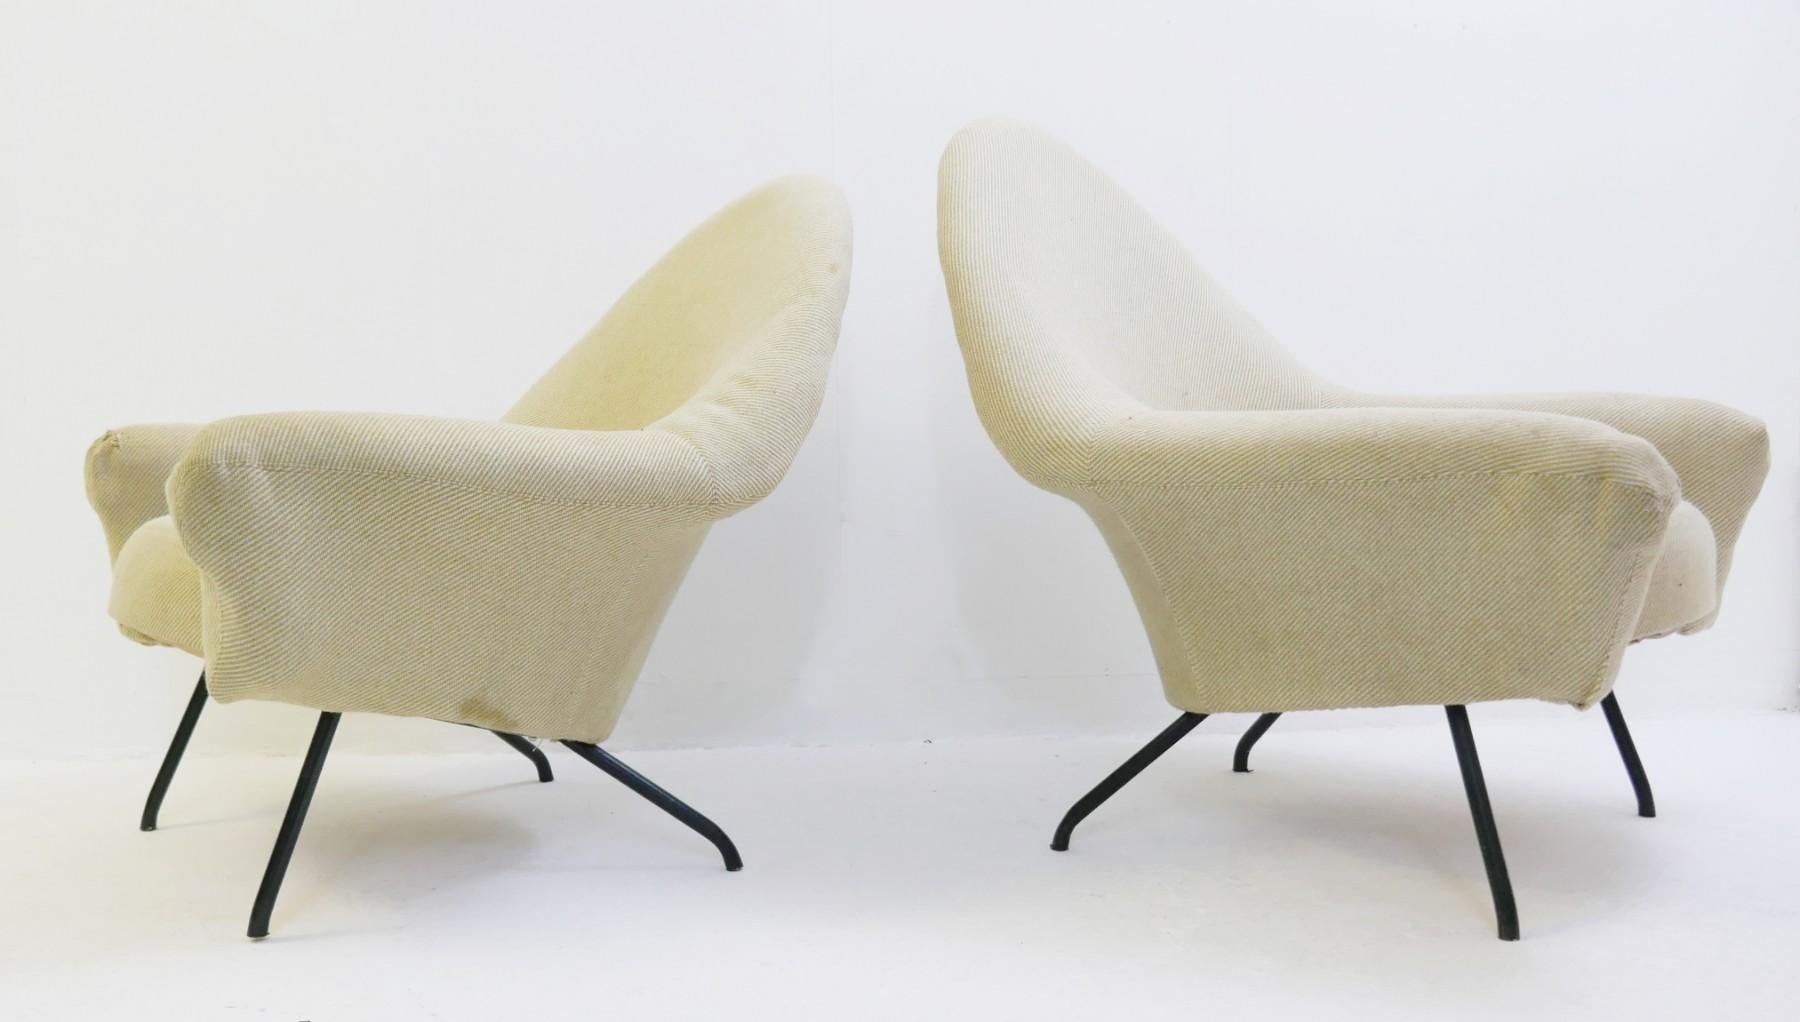 Pair of armchairs model 770 by Joseph-André Motte - 1958.